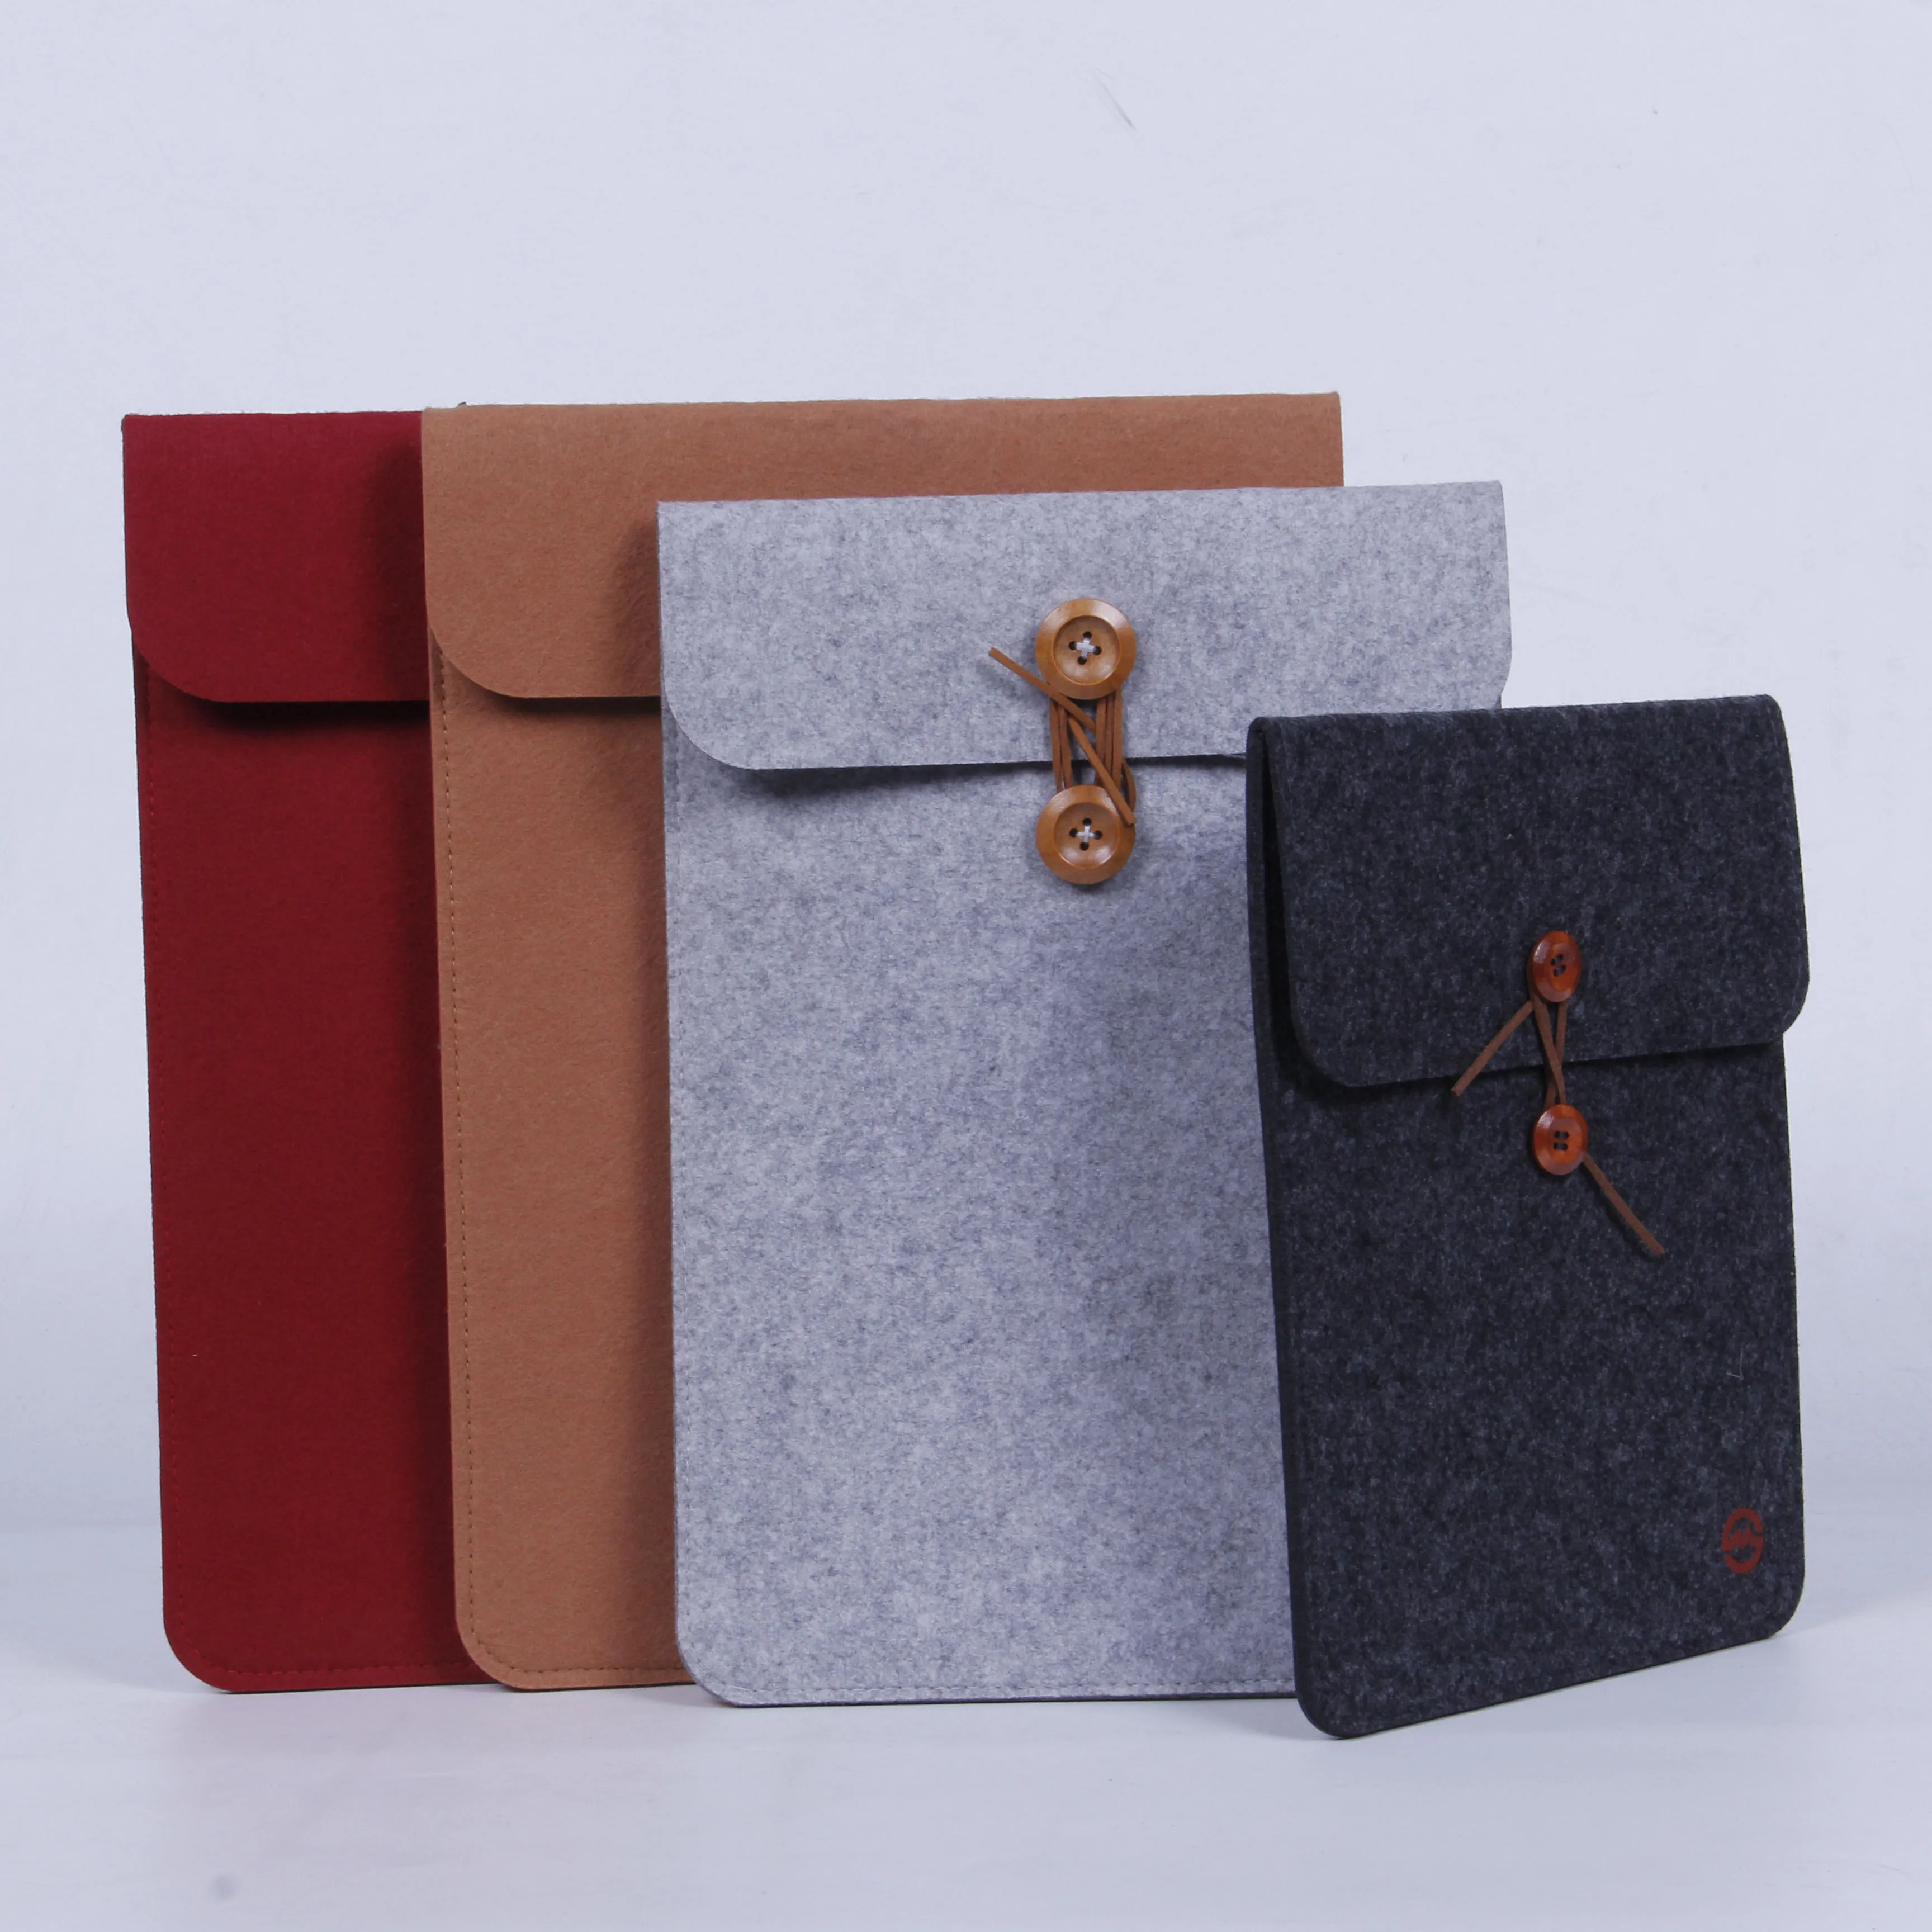 2021 new design office package fashion package portable business felt package